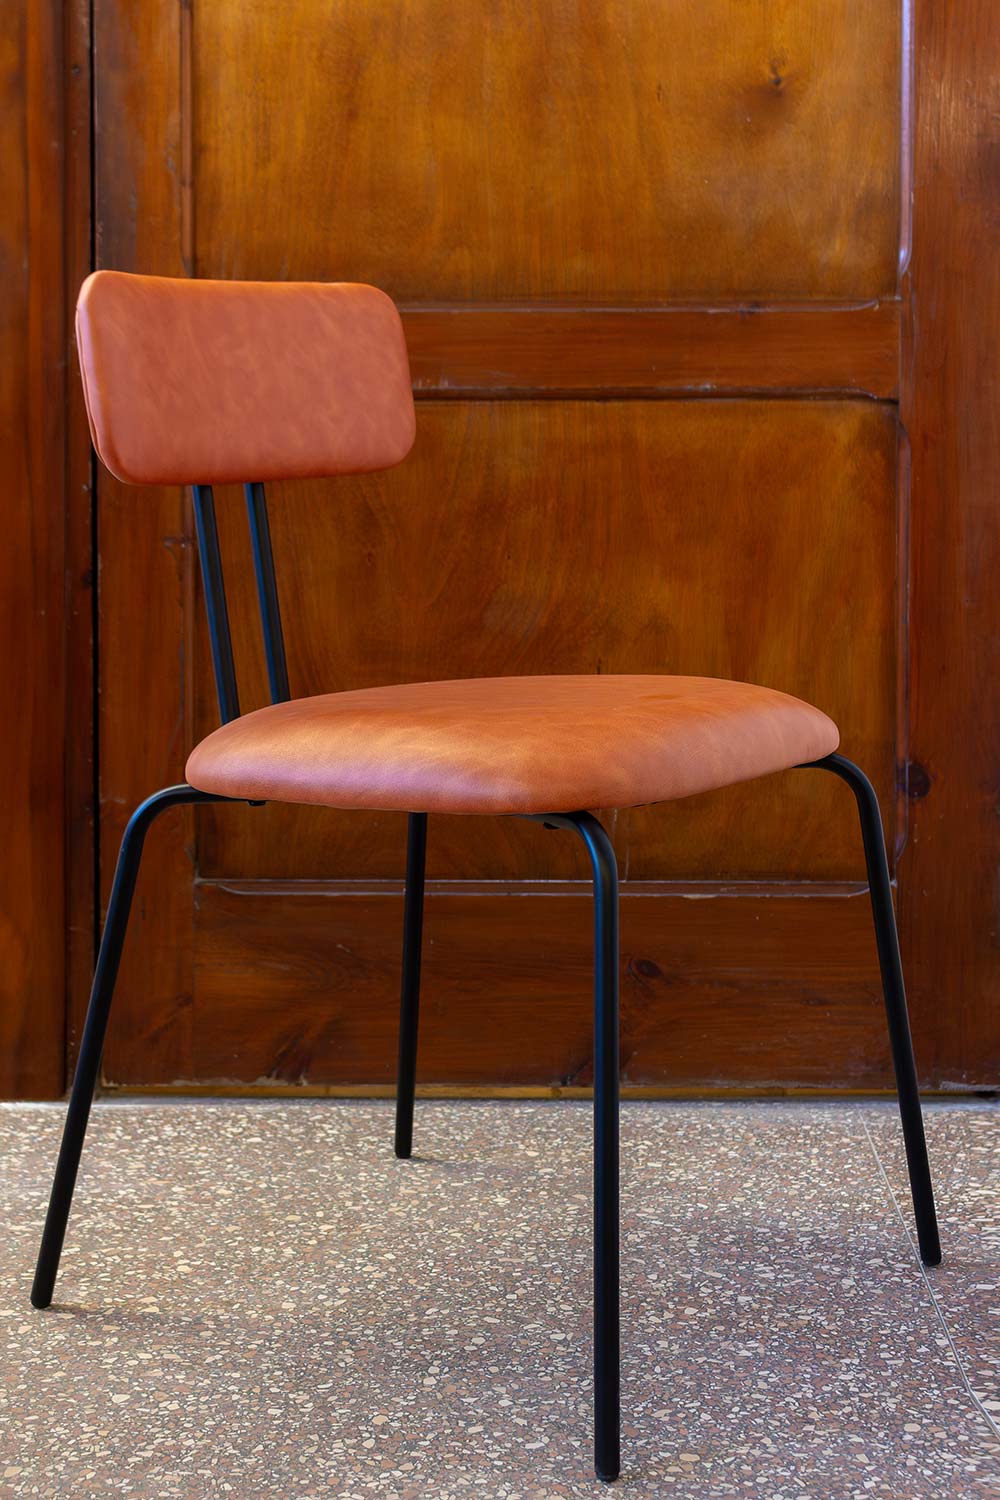 Leatherette chairs.